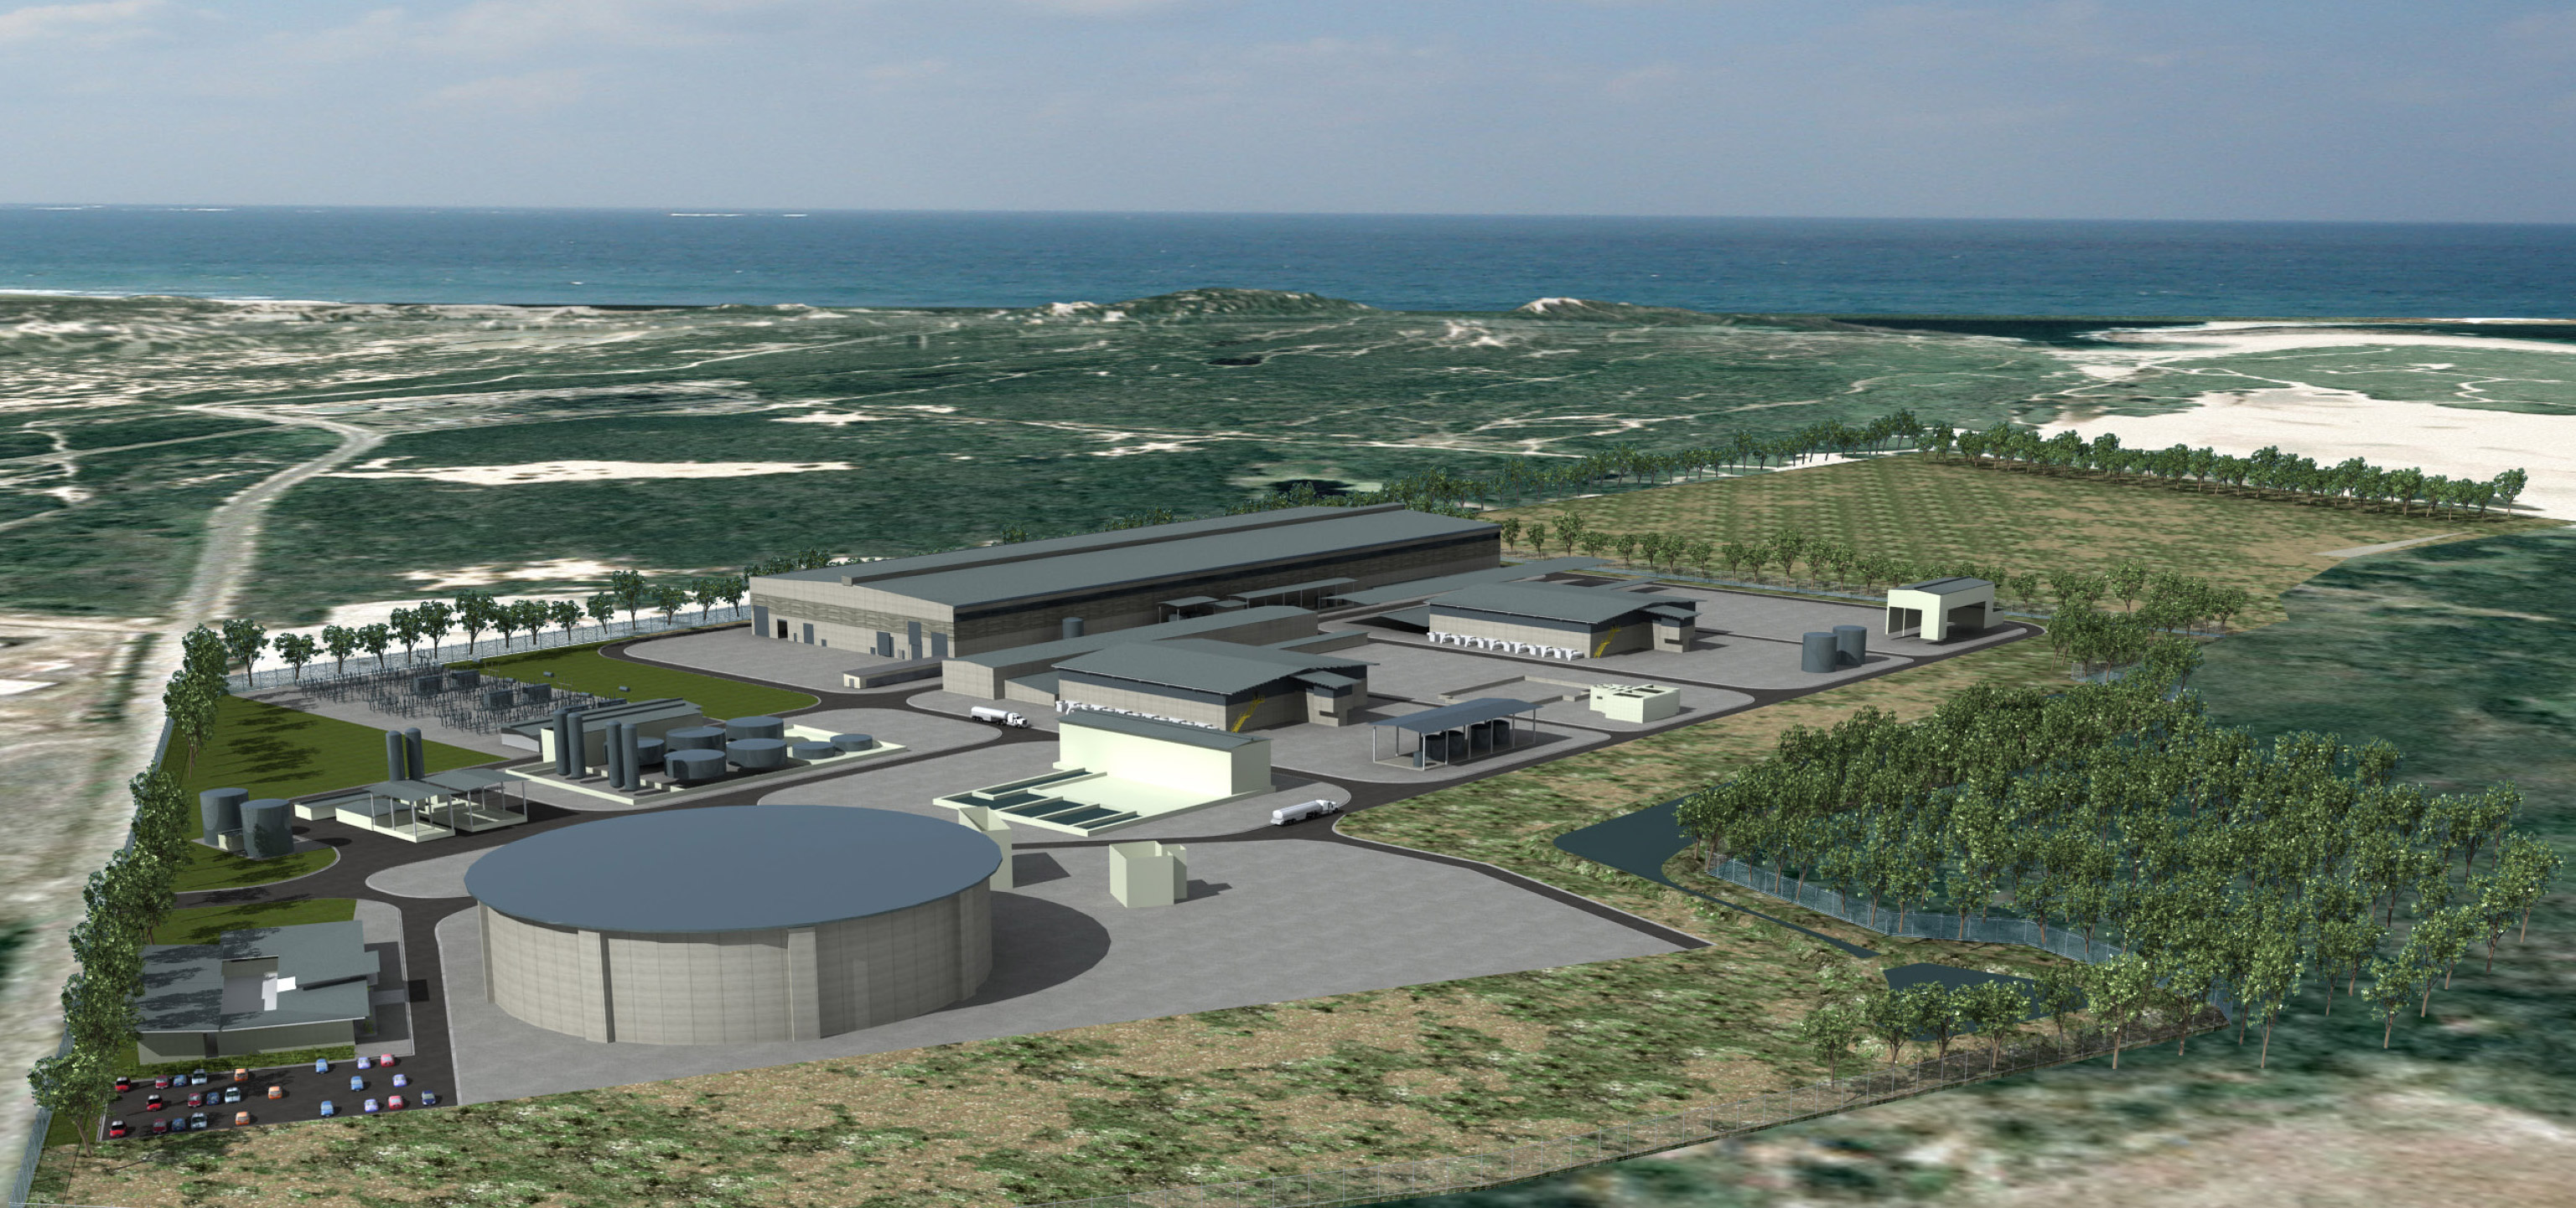 Artists impression of the desalination plant